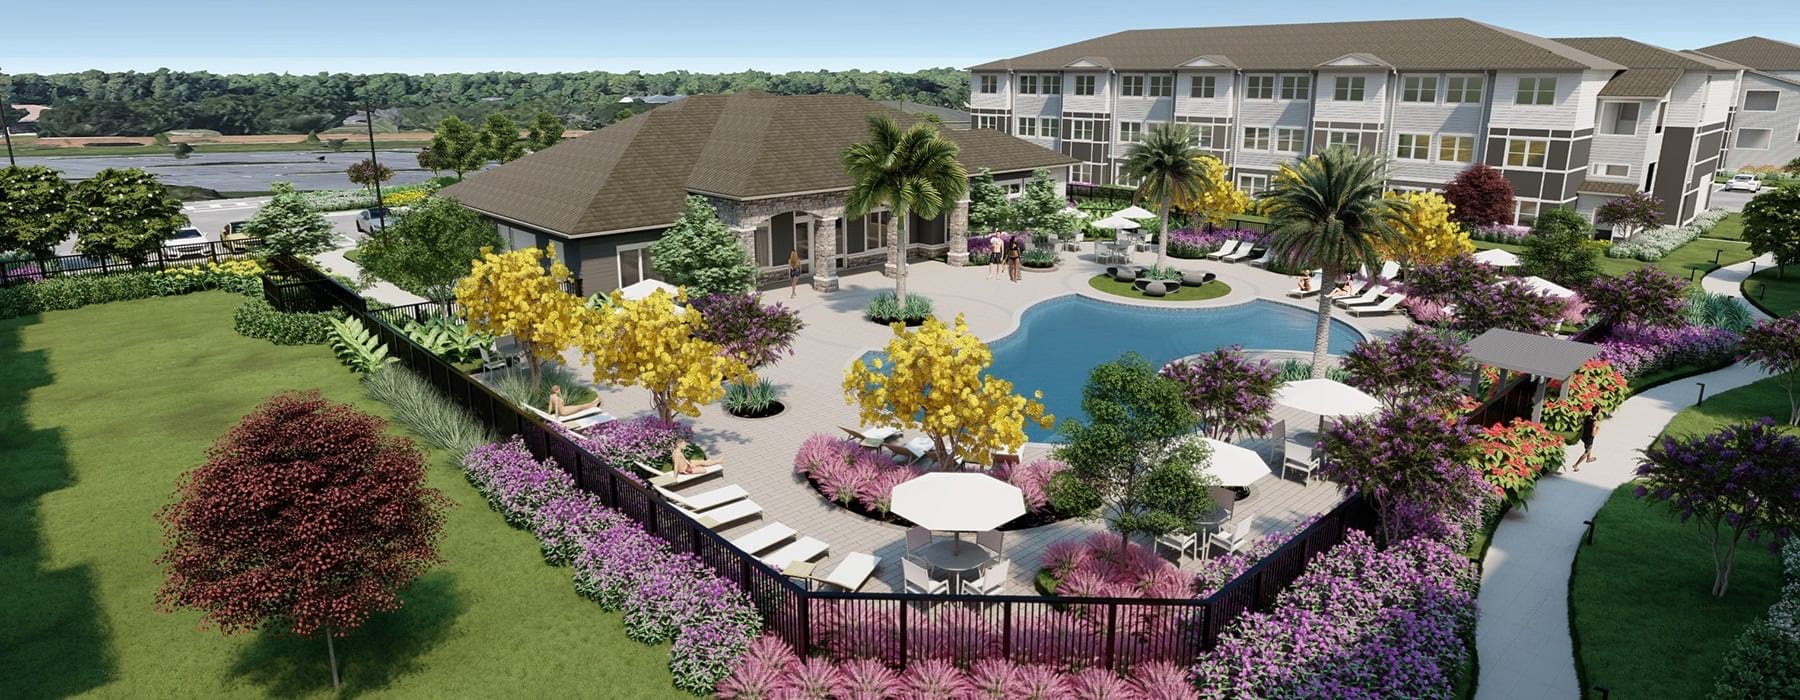 aerial rendering of the pool courtyard showing tropical landscaping